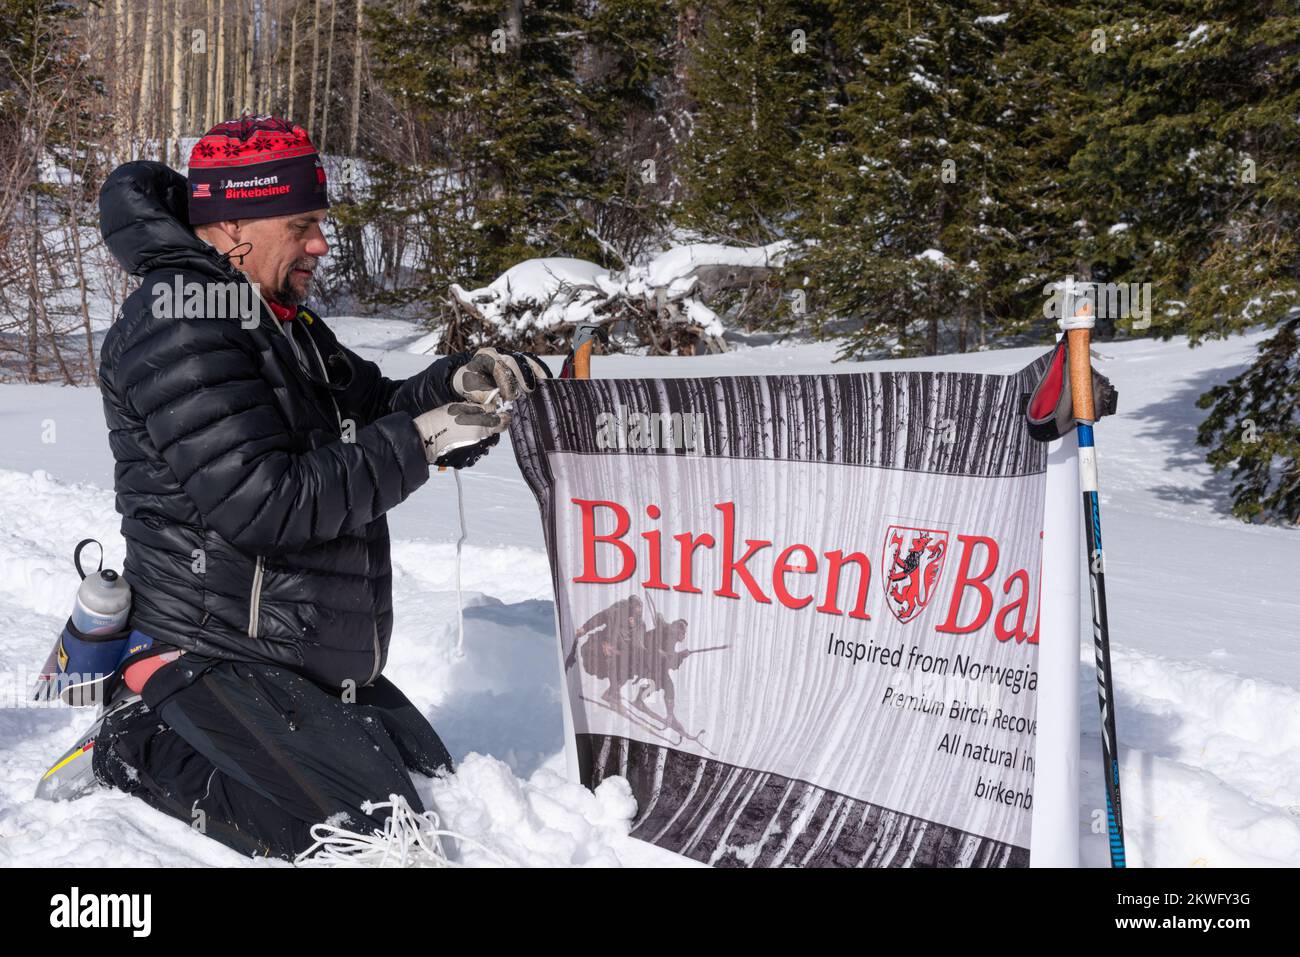 Man kneels in snow while putting up asign advertising Berkenbeiner inspired cross country ski race in the Chama Chile Ski Classic near Chama, NM, USA. Stock Photo